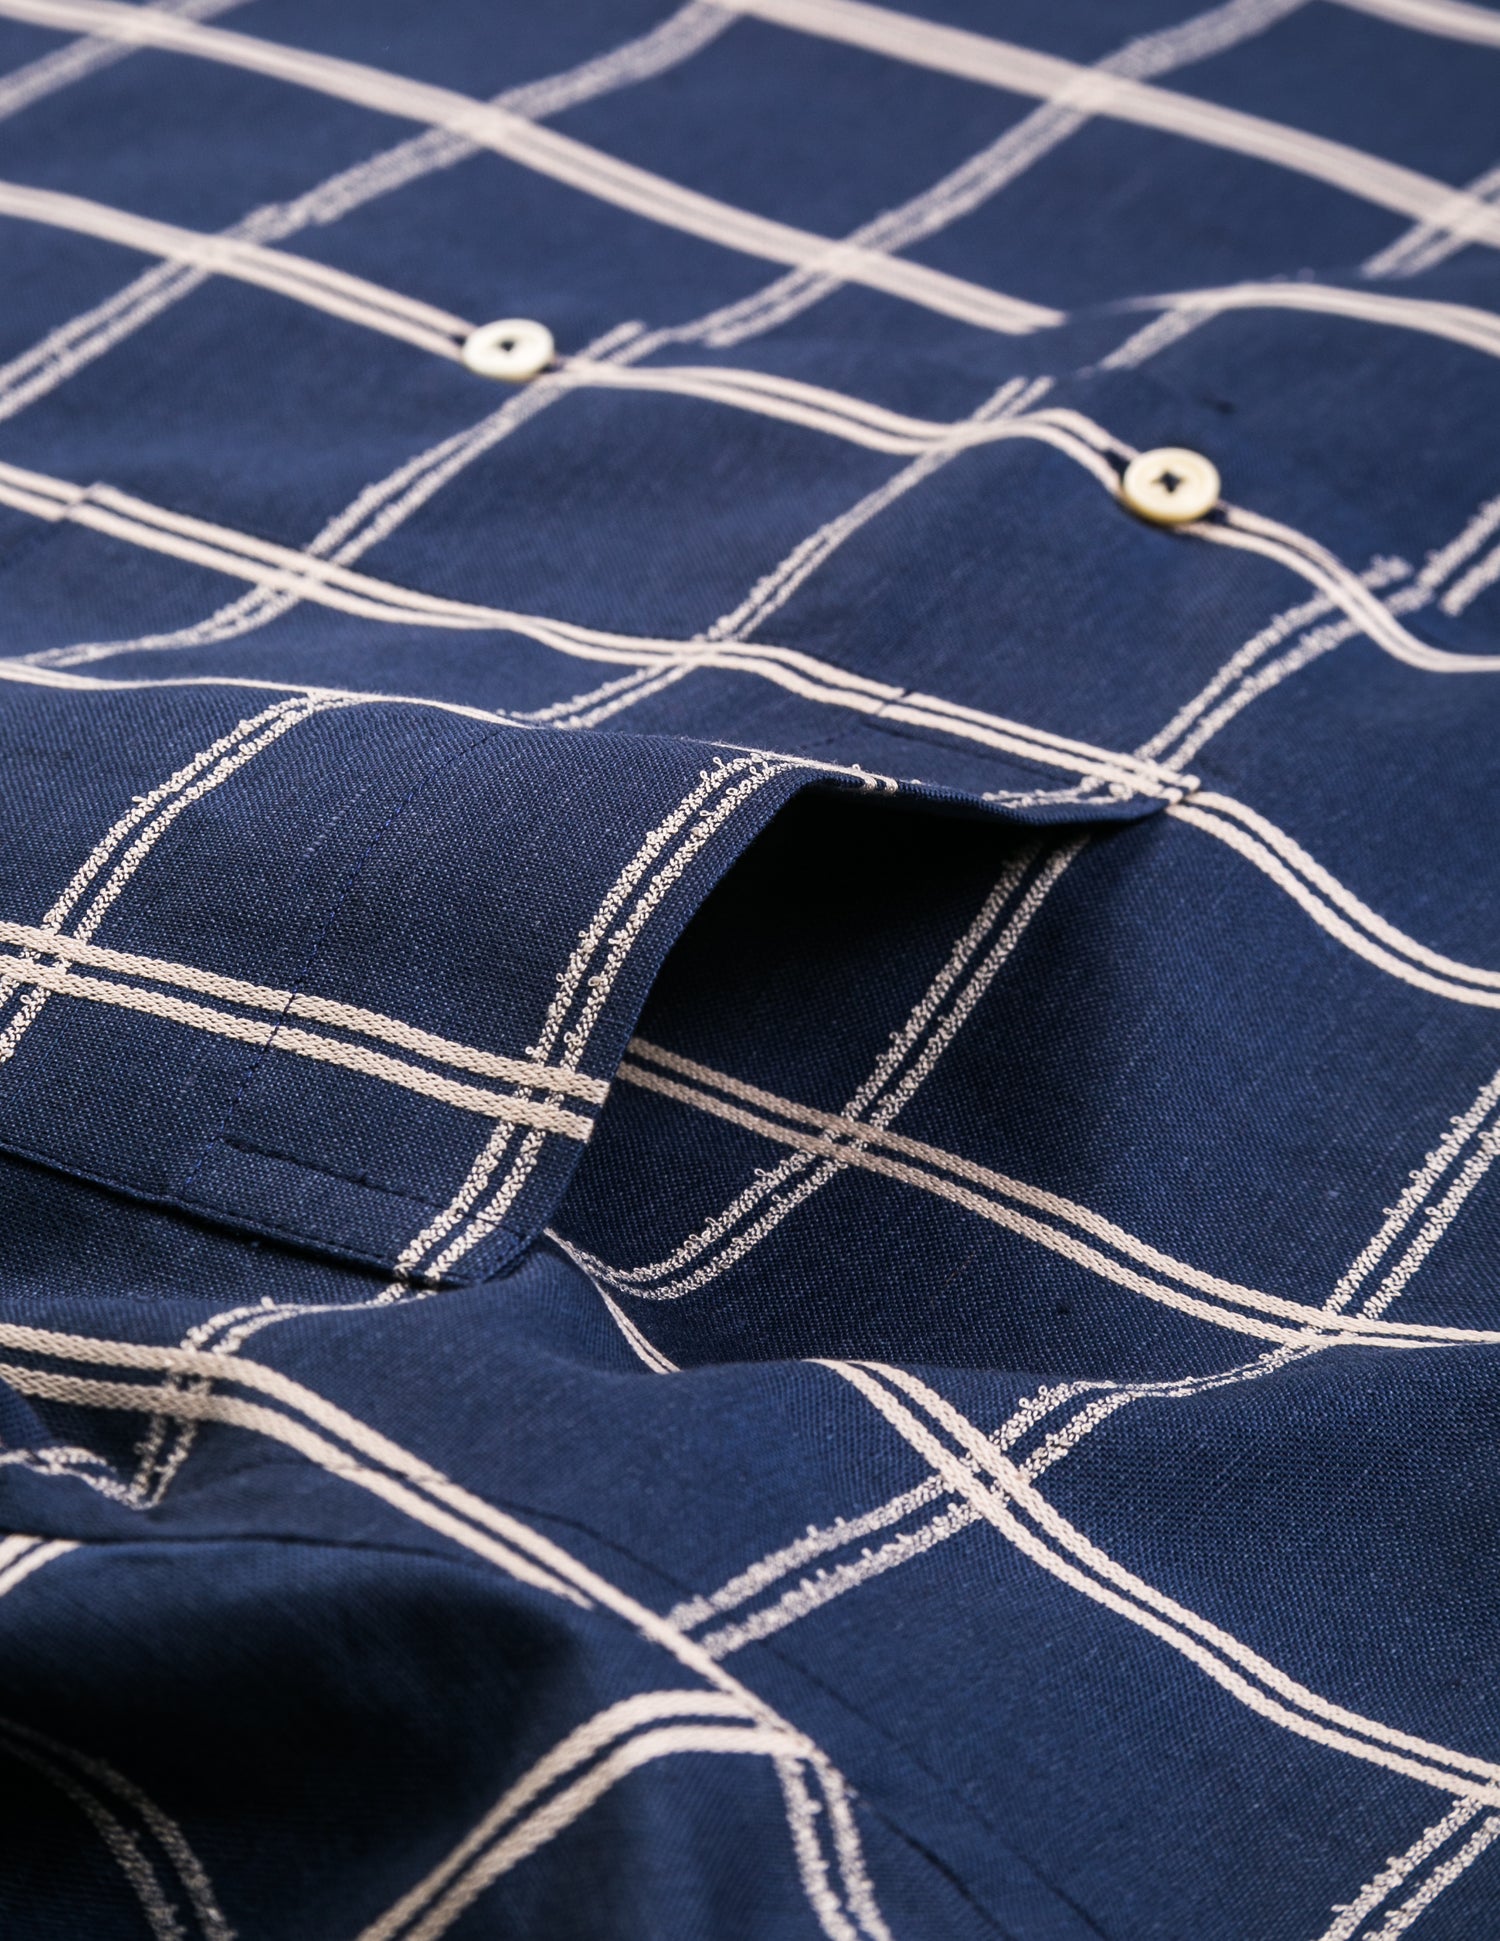 Fabric and pocket detail shot of Brooklyn Tailors BKT18 Camp Shirt in Blue Windowpane